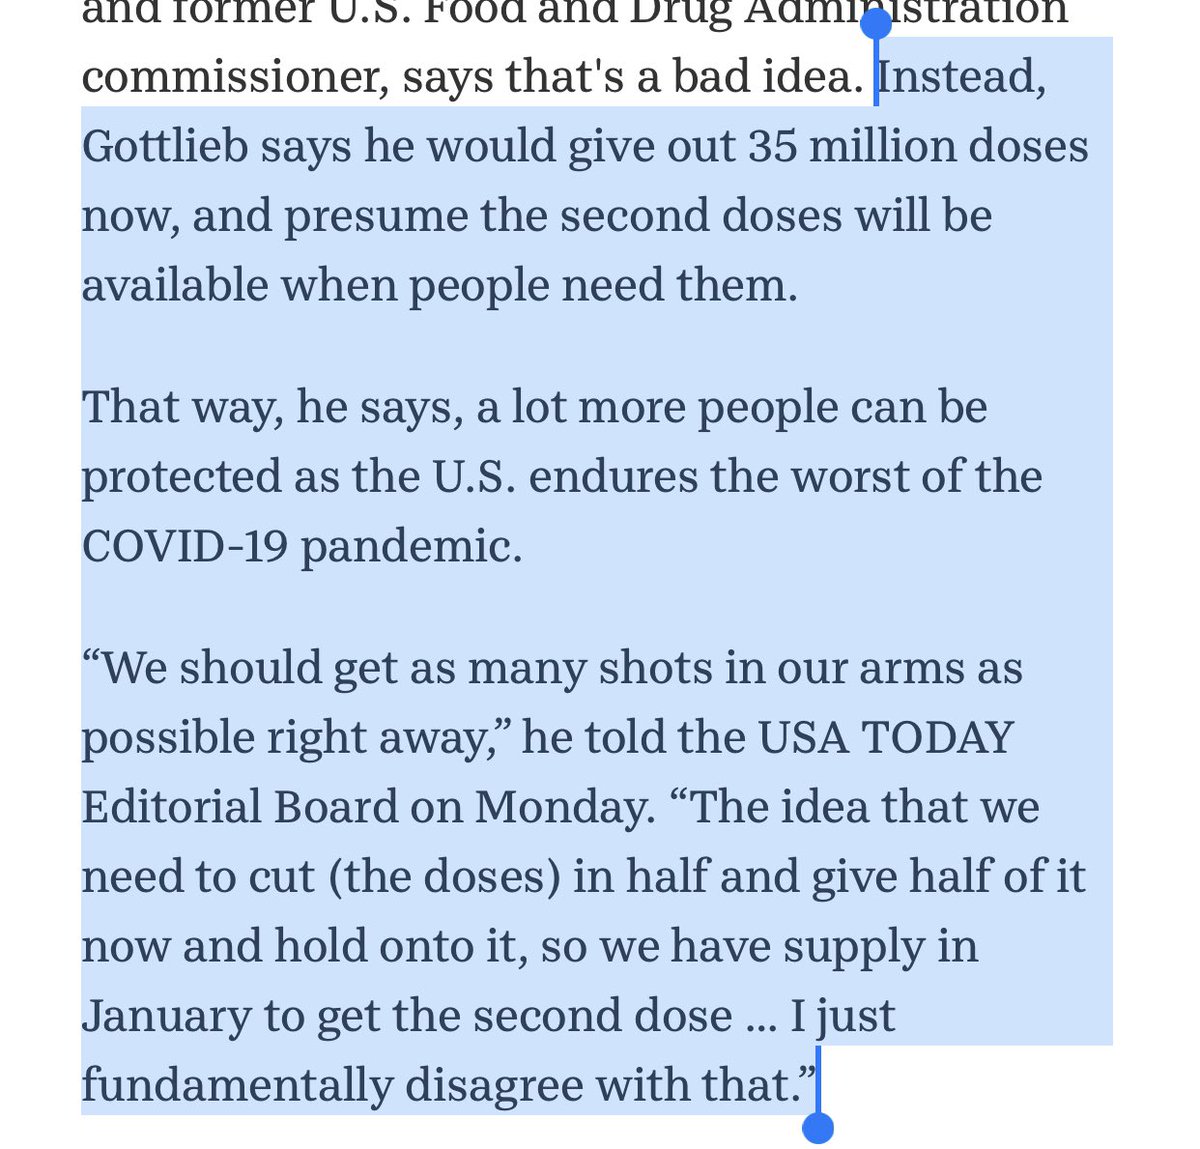 4) this 1-dose is good question.  @ScottGottliebMD thinks that if we have 40 million doses, we shouldn’t withhold half, but that we should just roll out 35 mil for everyone now. @ArthurCaplan also agrees. We should 1-dose vaccinate as many as possible.  https://amp.usatoday.com/amp/3860363001 